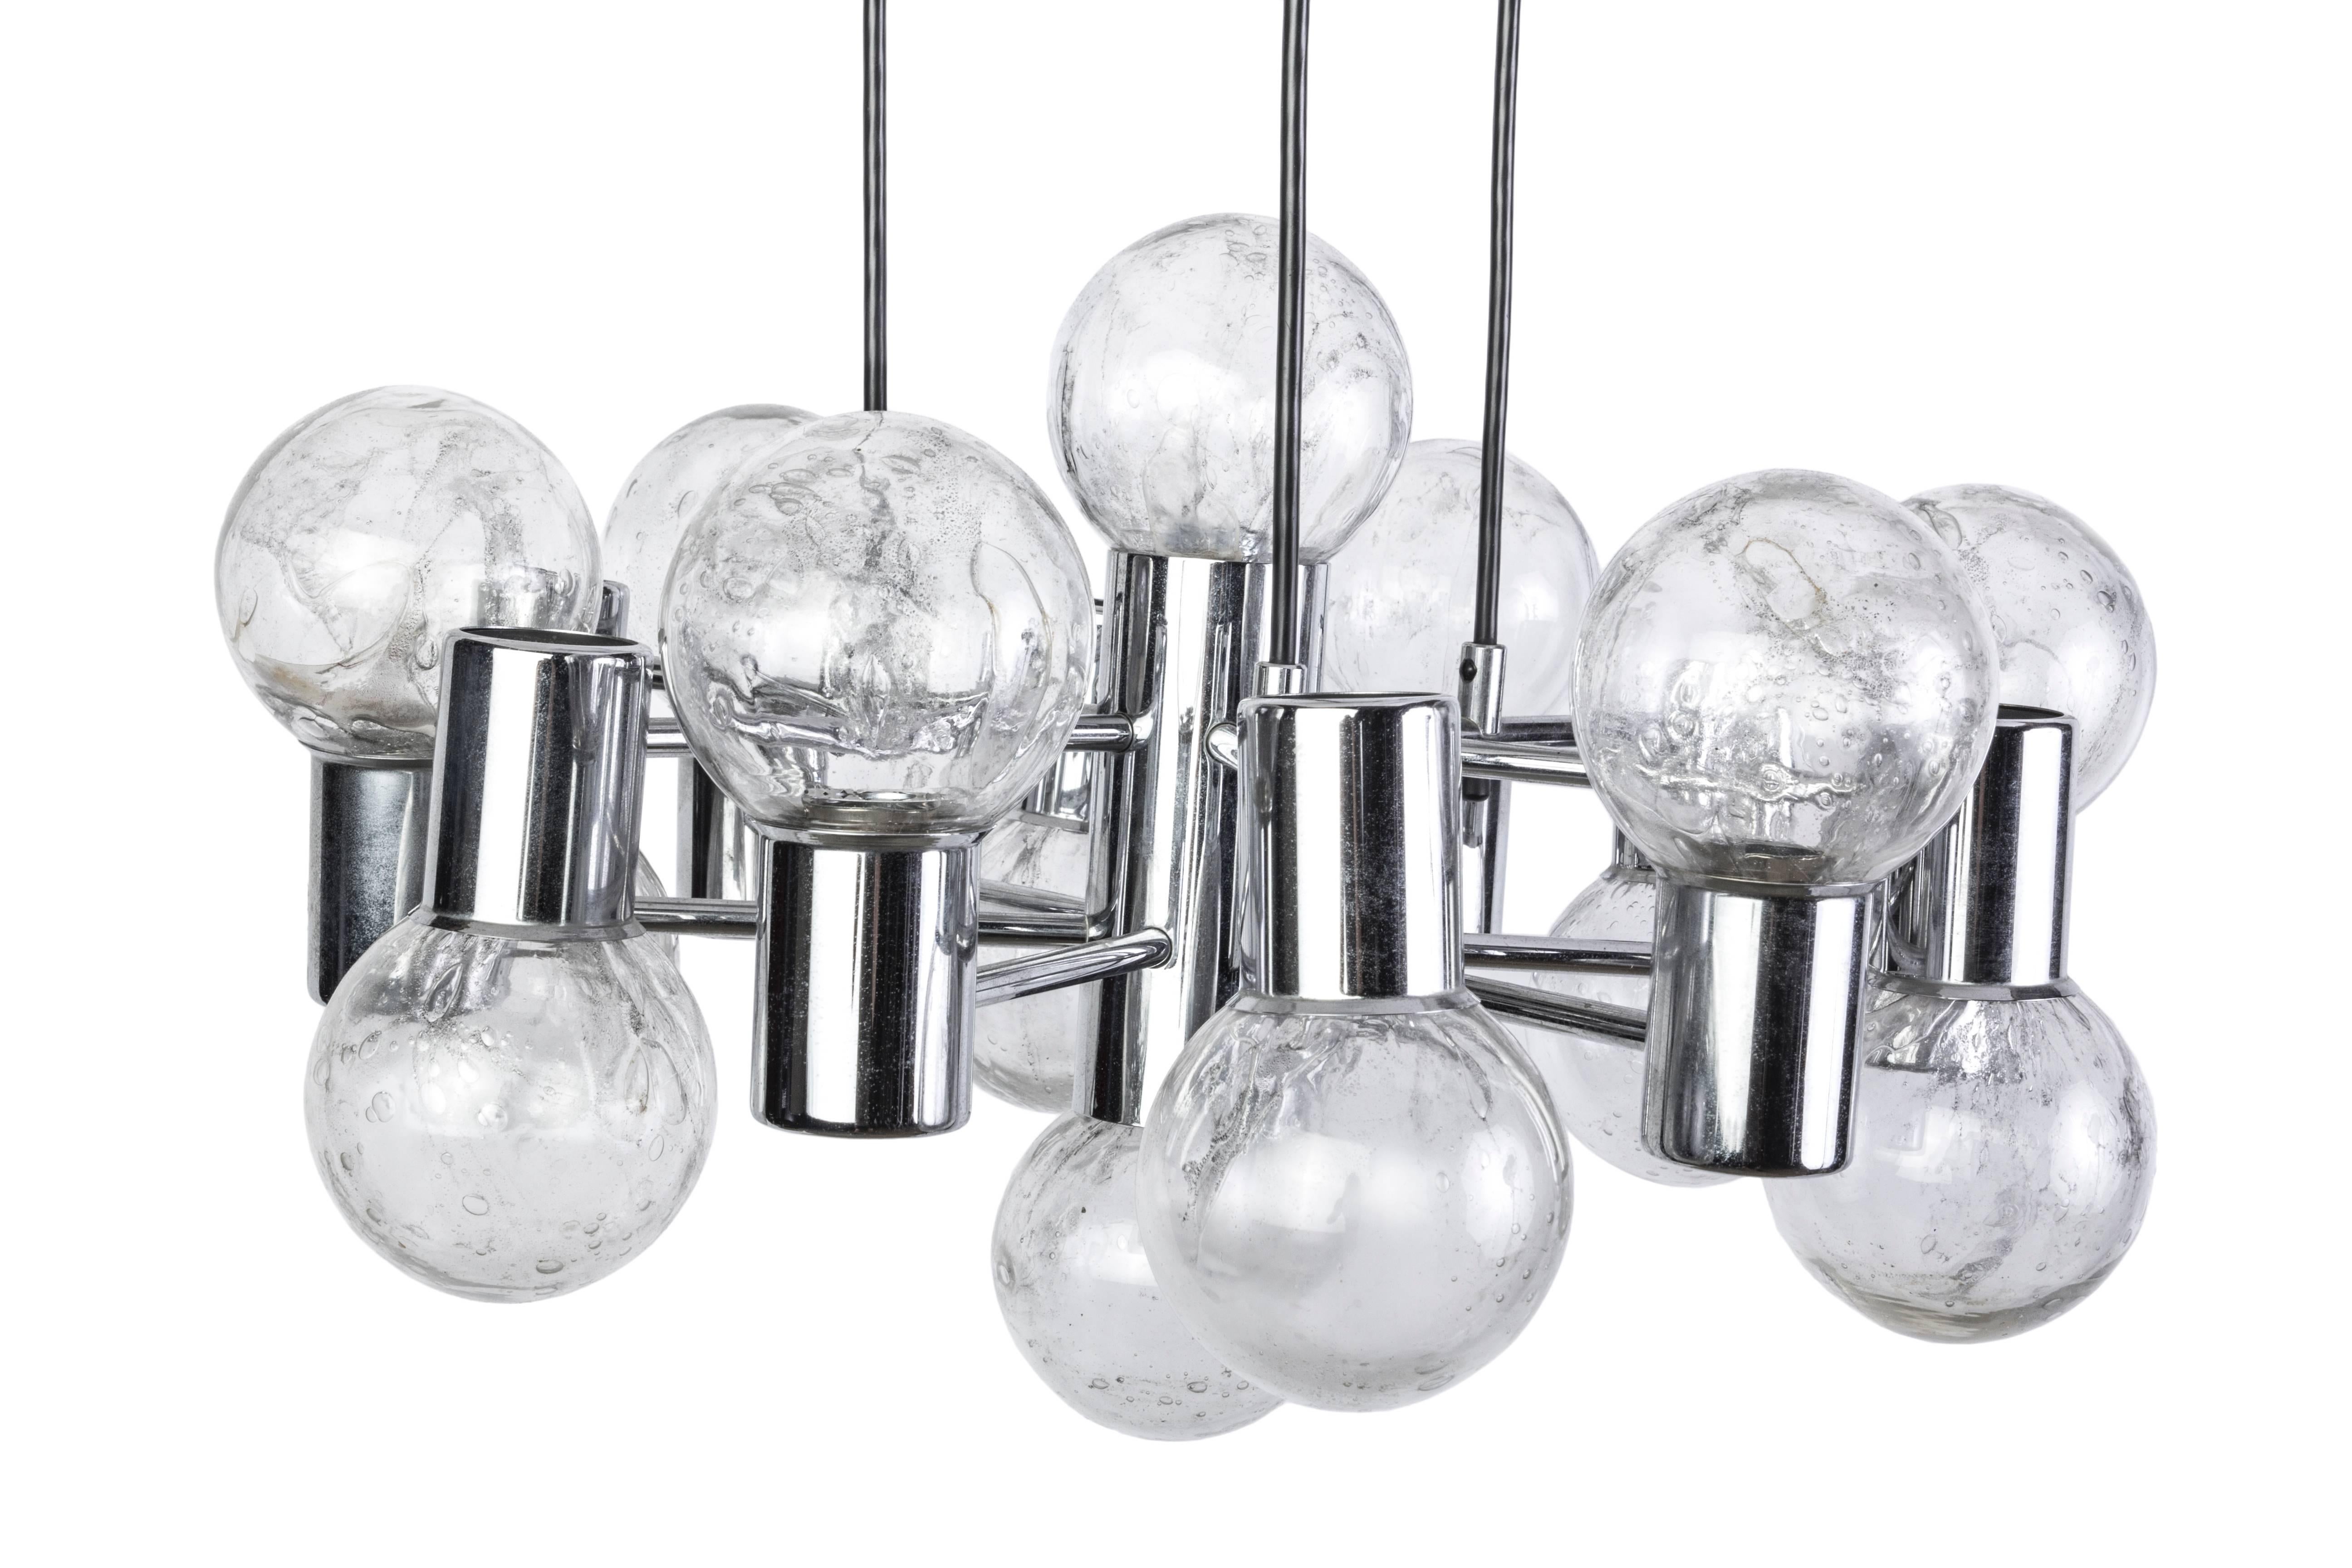 This stunning Mid-Century Modernist chandelier was designed by Doria. It features an orbital form design on a chrome frame with bubble textured transparent glass shades.